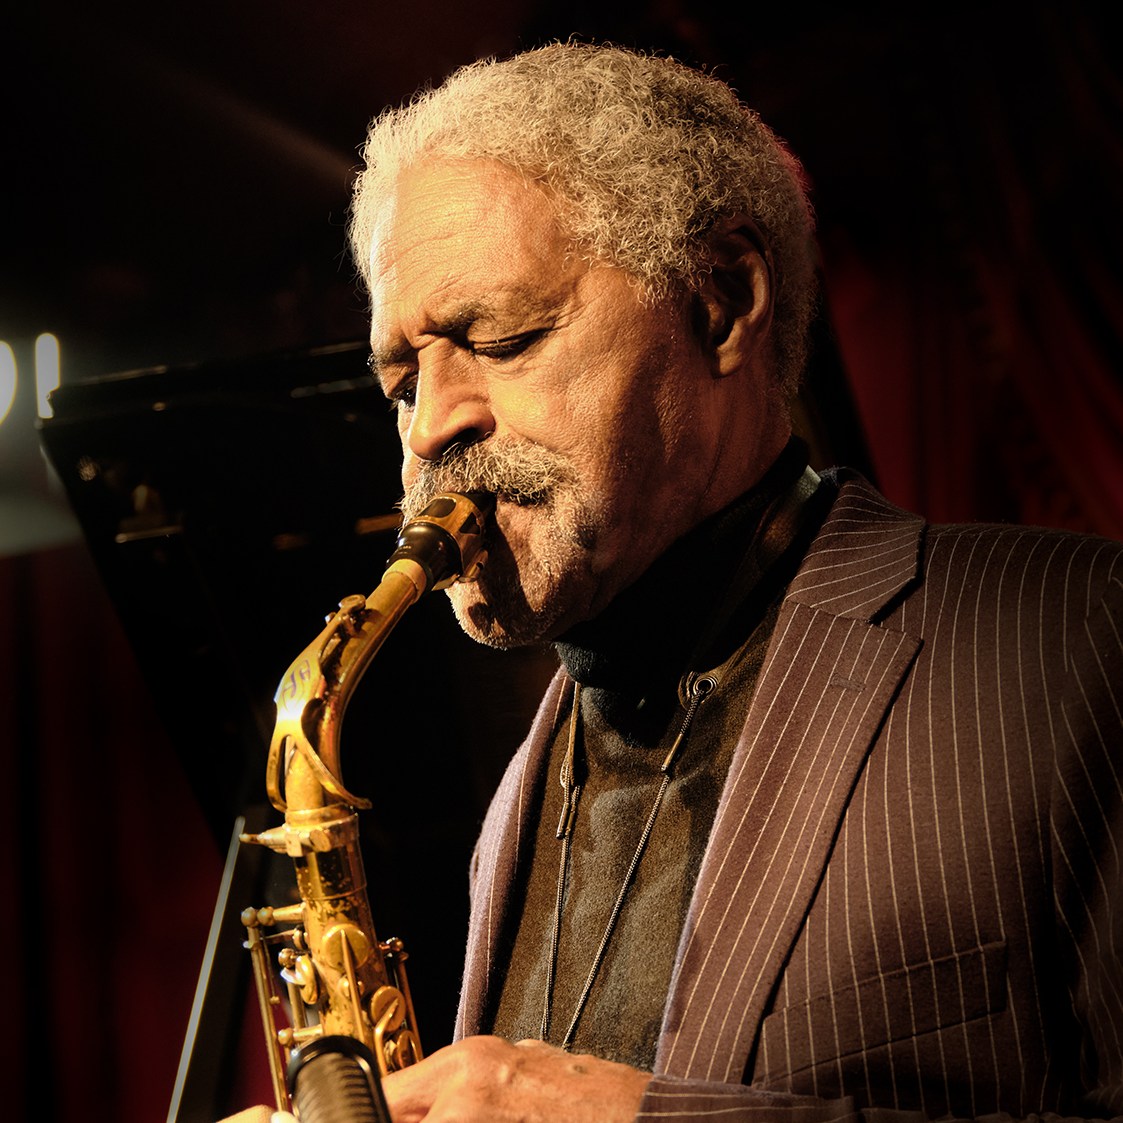 One of America’s best alto saxophonists Charles McPherson